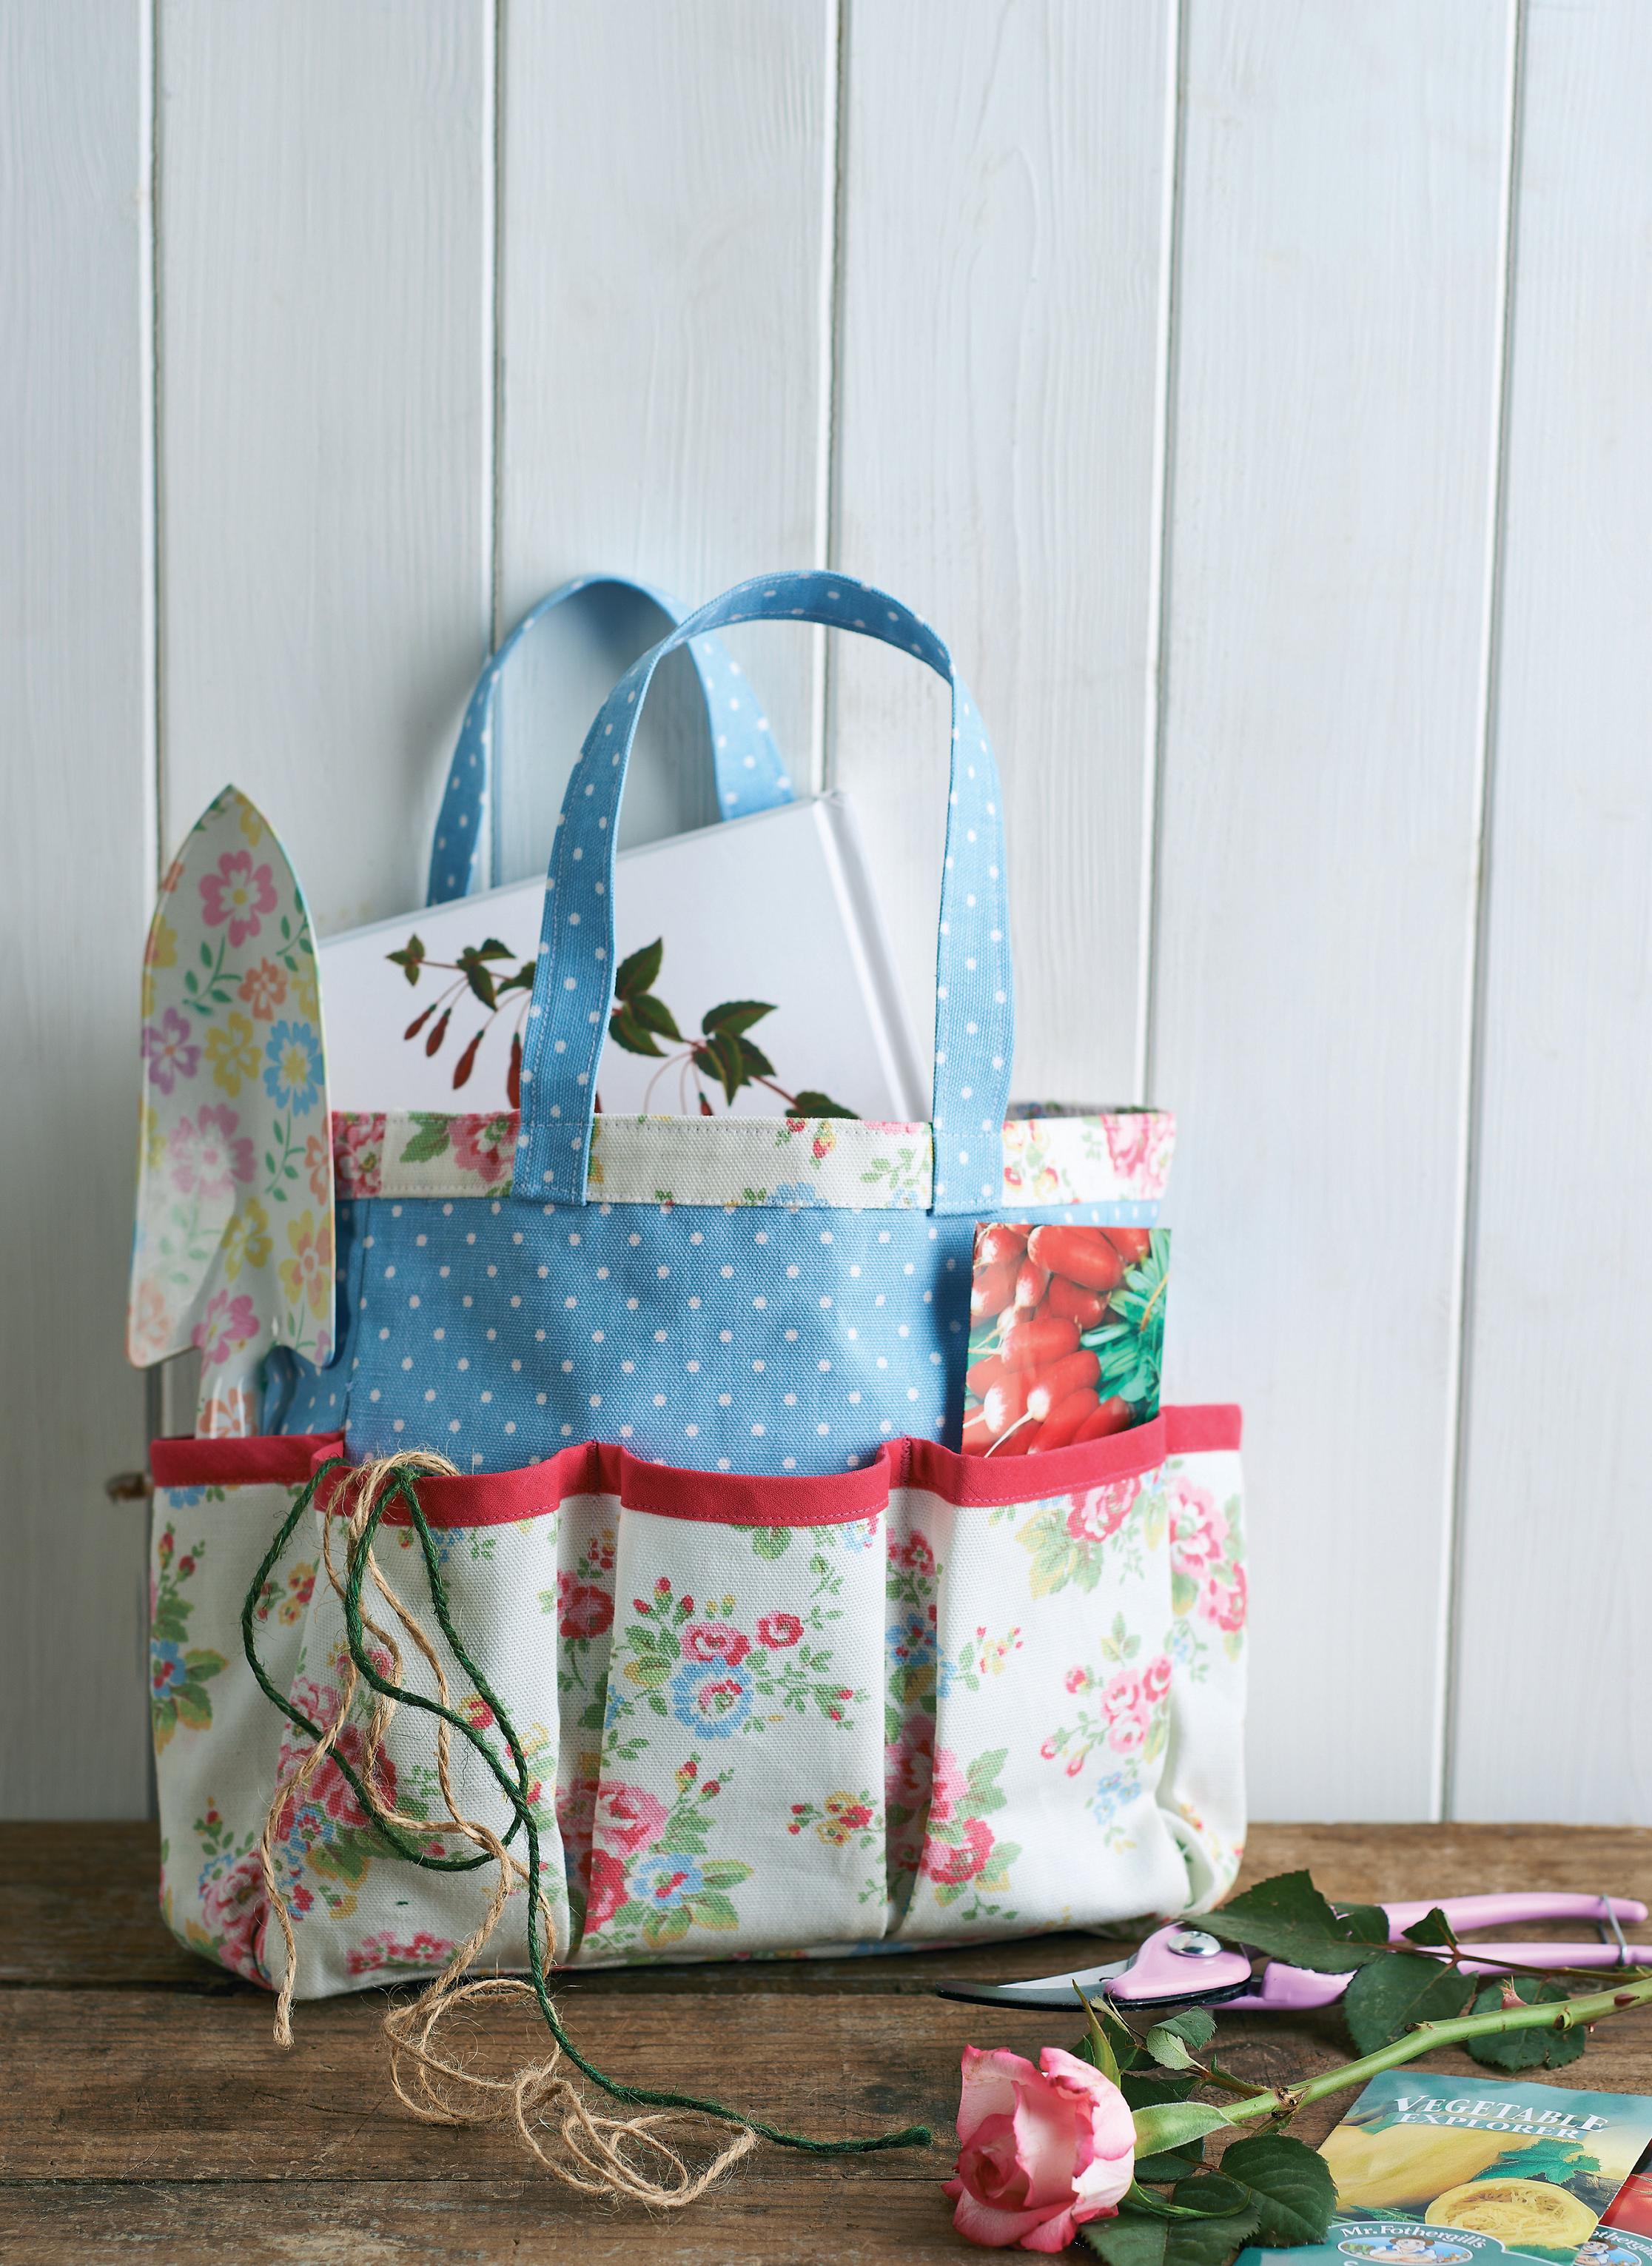 Cath Kidston Fabric Gardening Tool Caddy and Knee Rest Free sewing